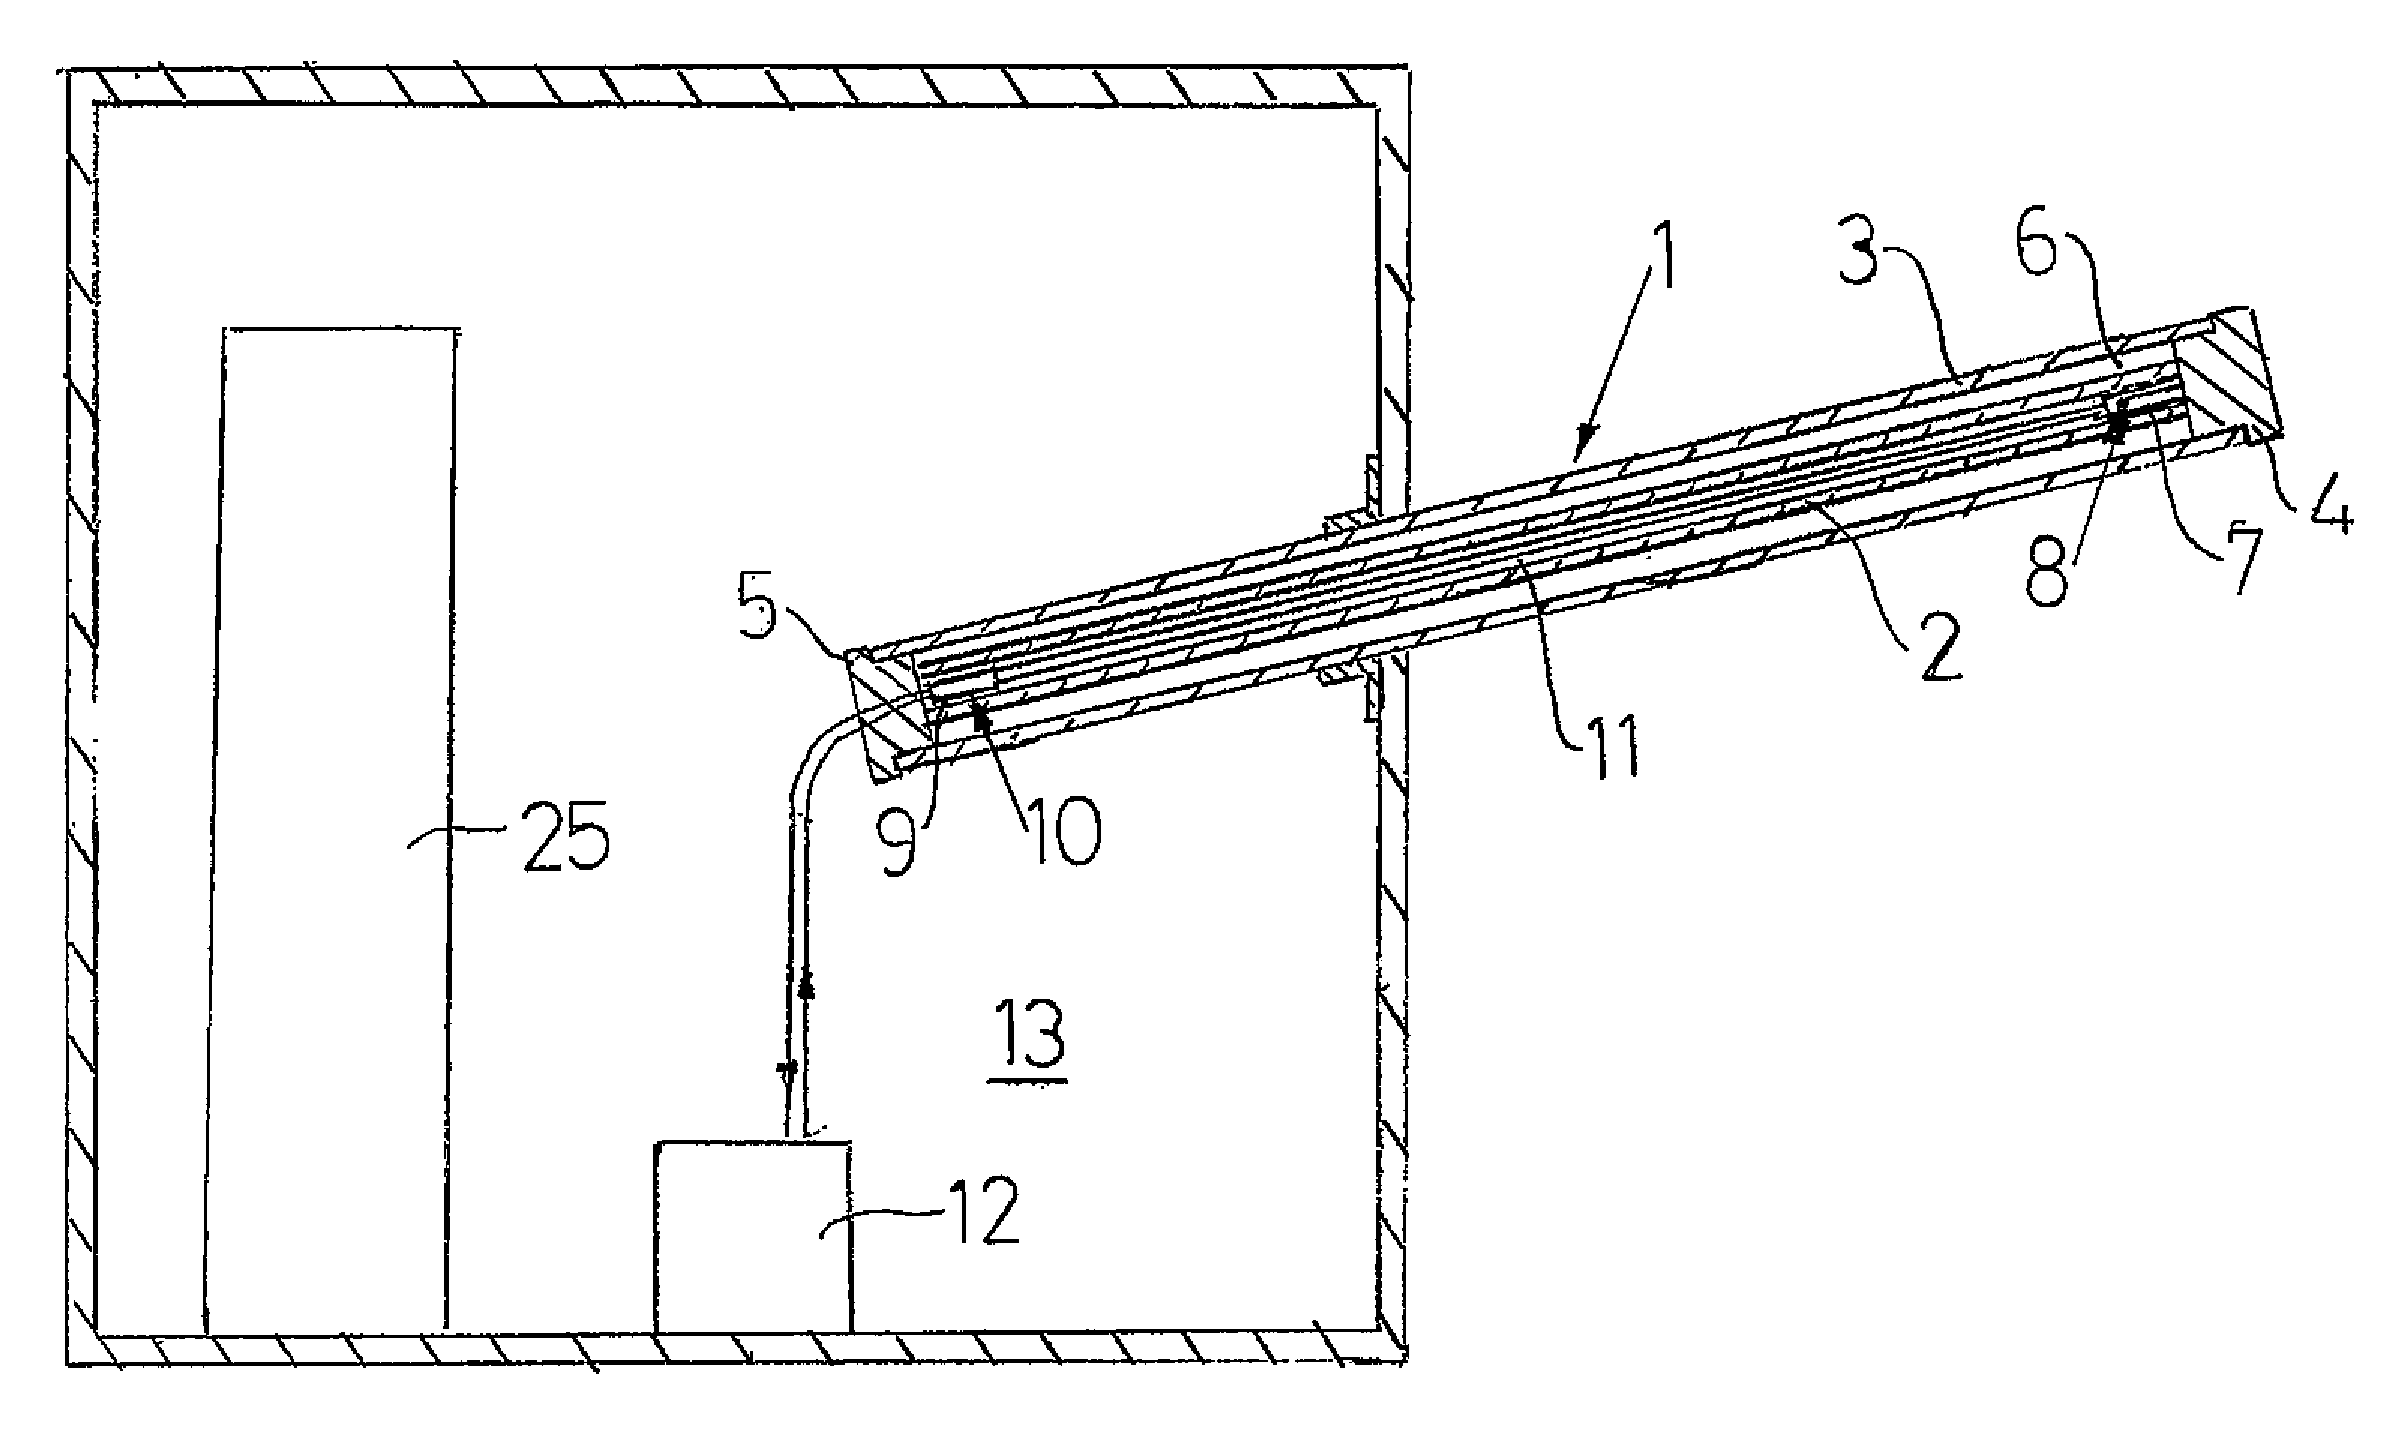 High Voltage Bushing, A Method Of Cooling A Conductor Thereof, And An Electric Power Distribution System Comprising Such A Bushing